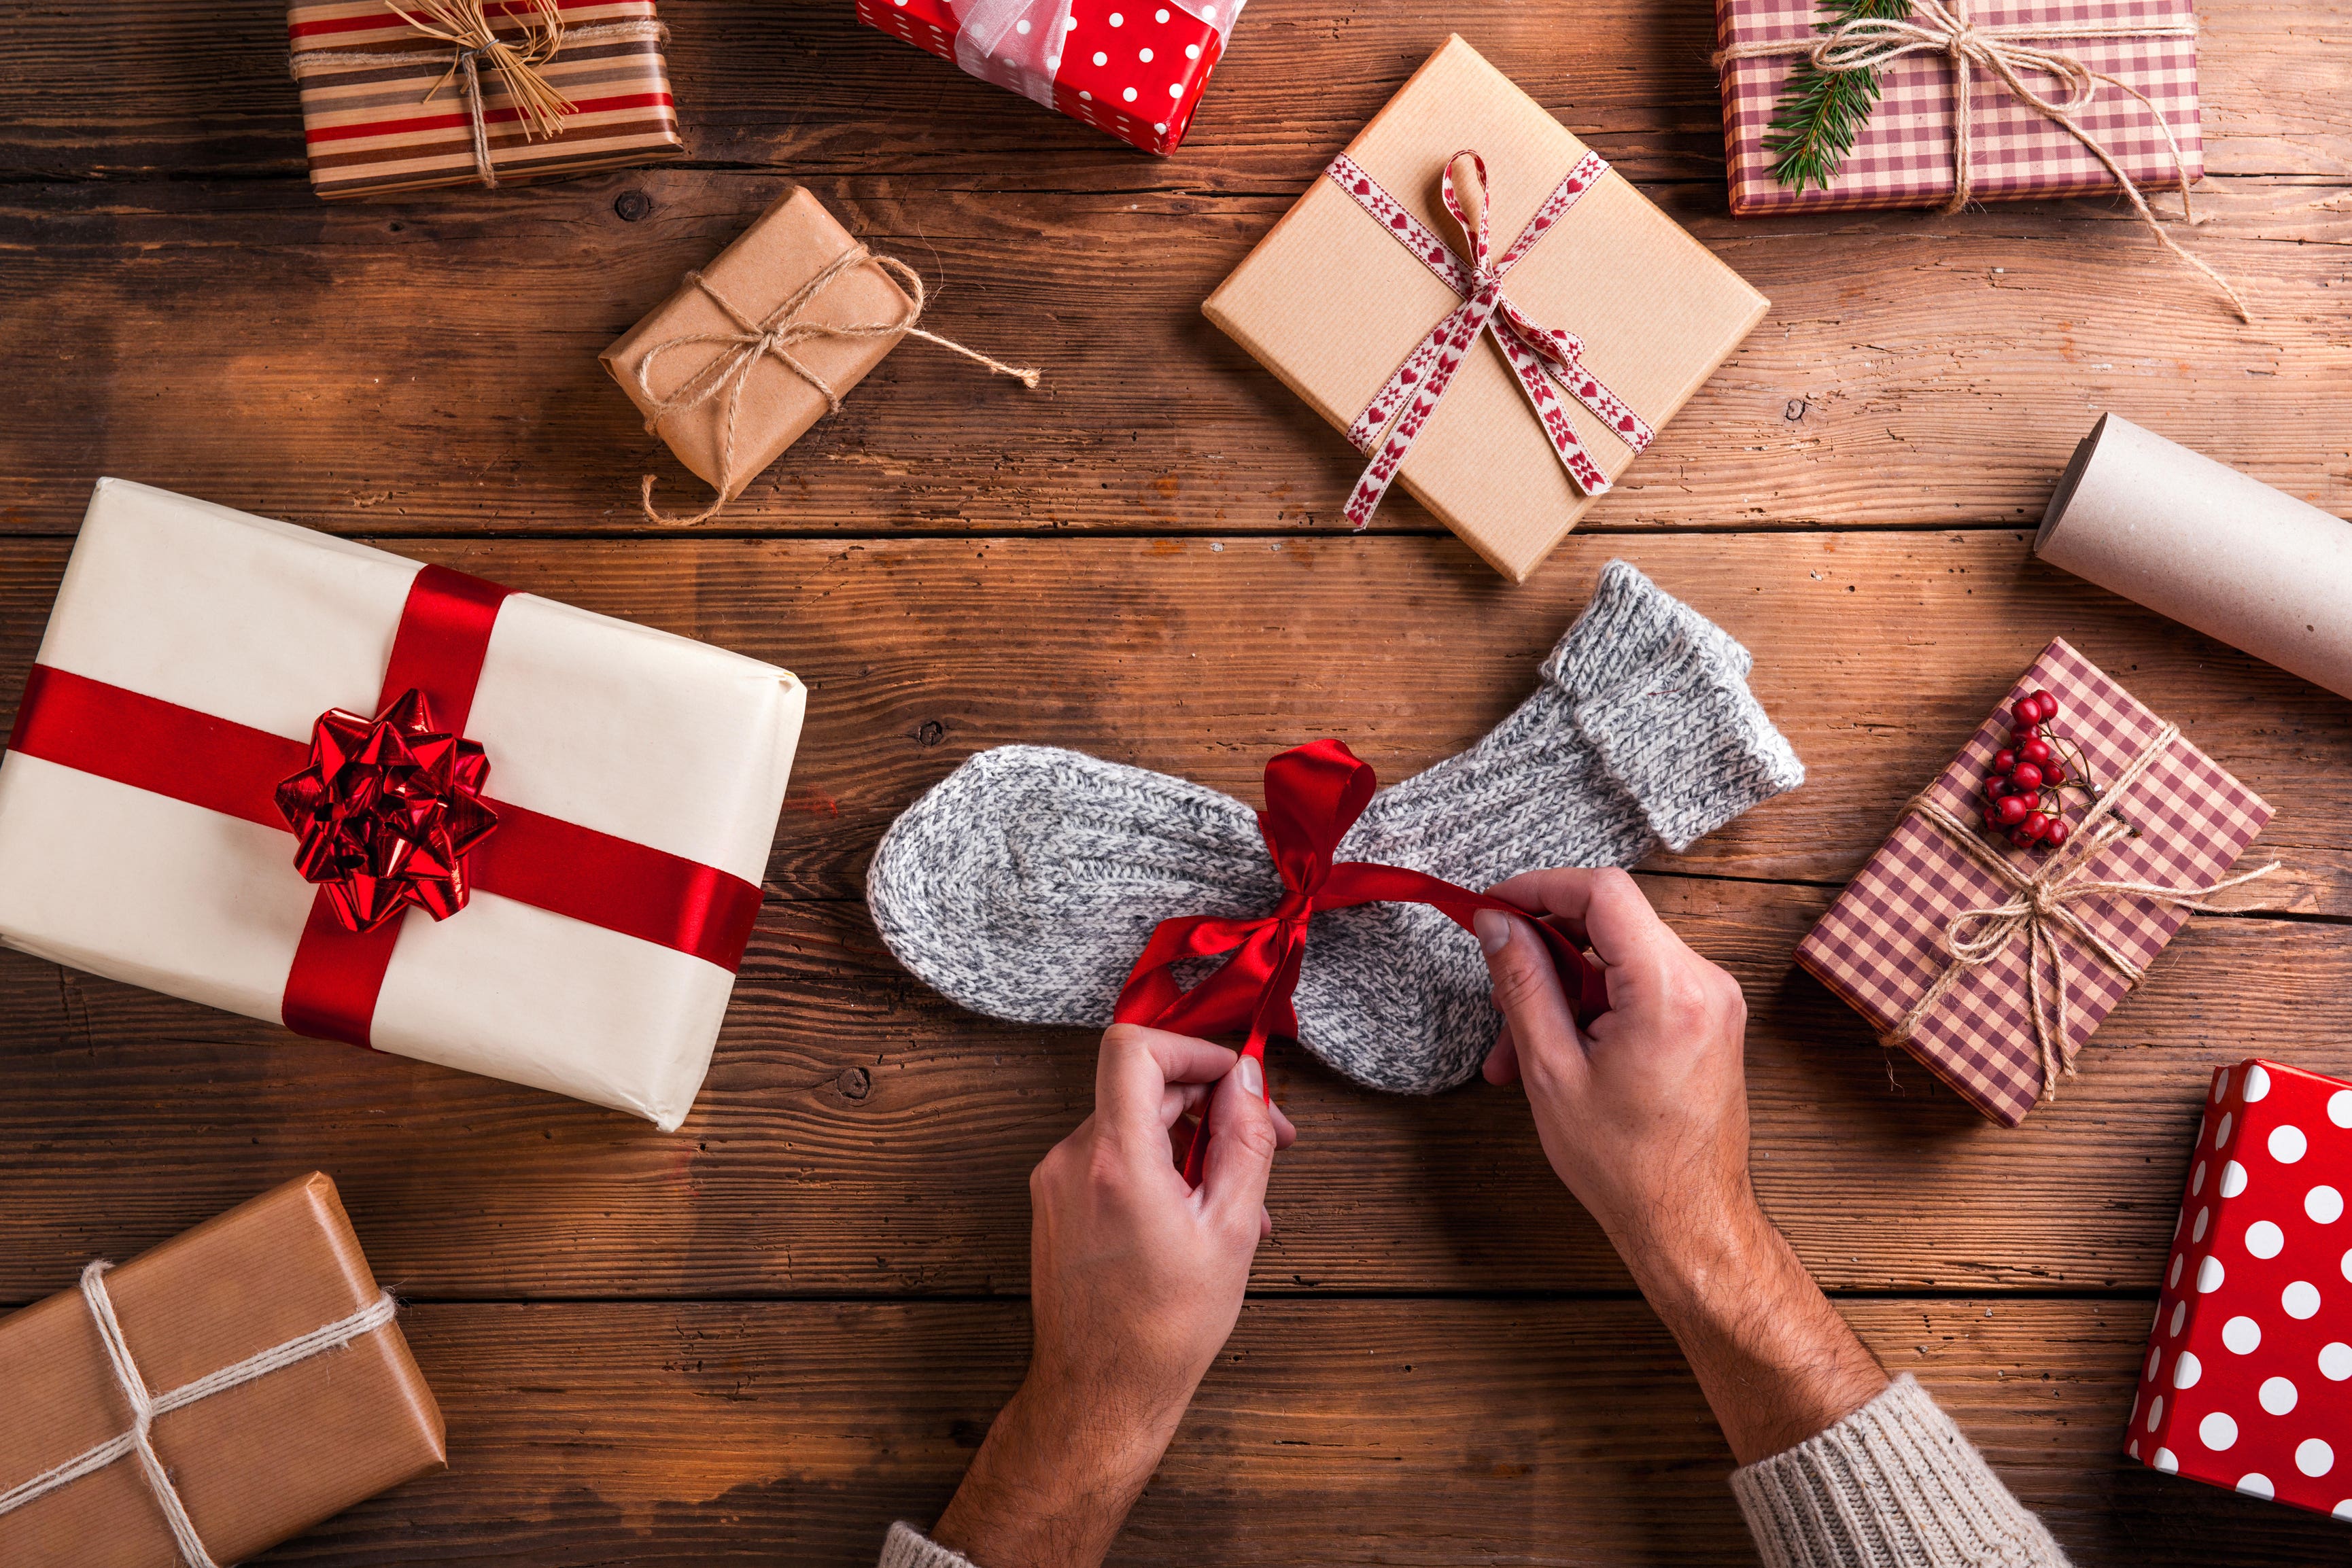 10 Christmas Gift Ideas and Presents to Give to Your Family and Friends -  Jacobs Christmas